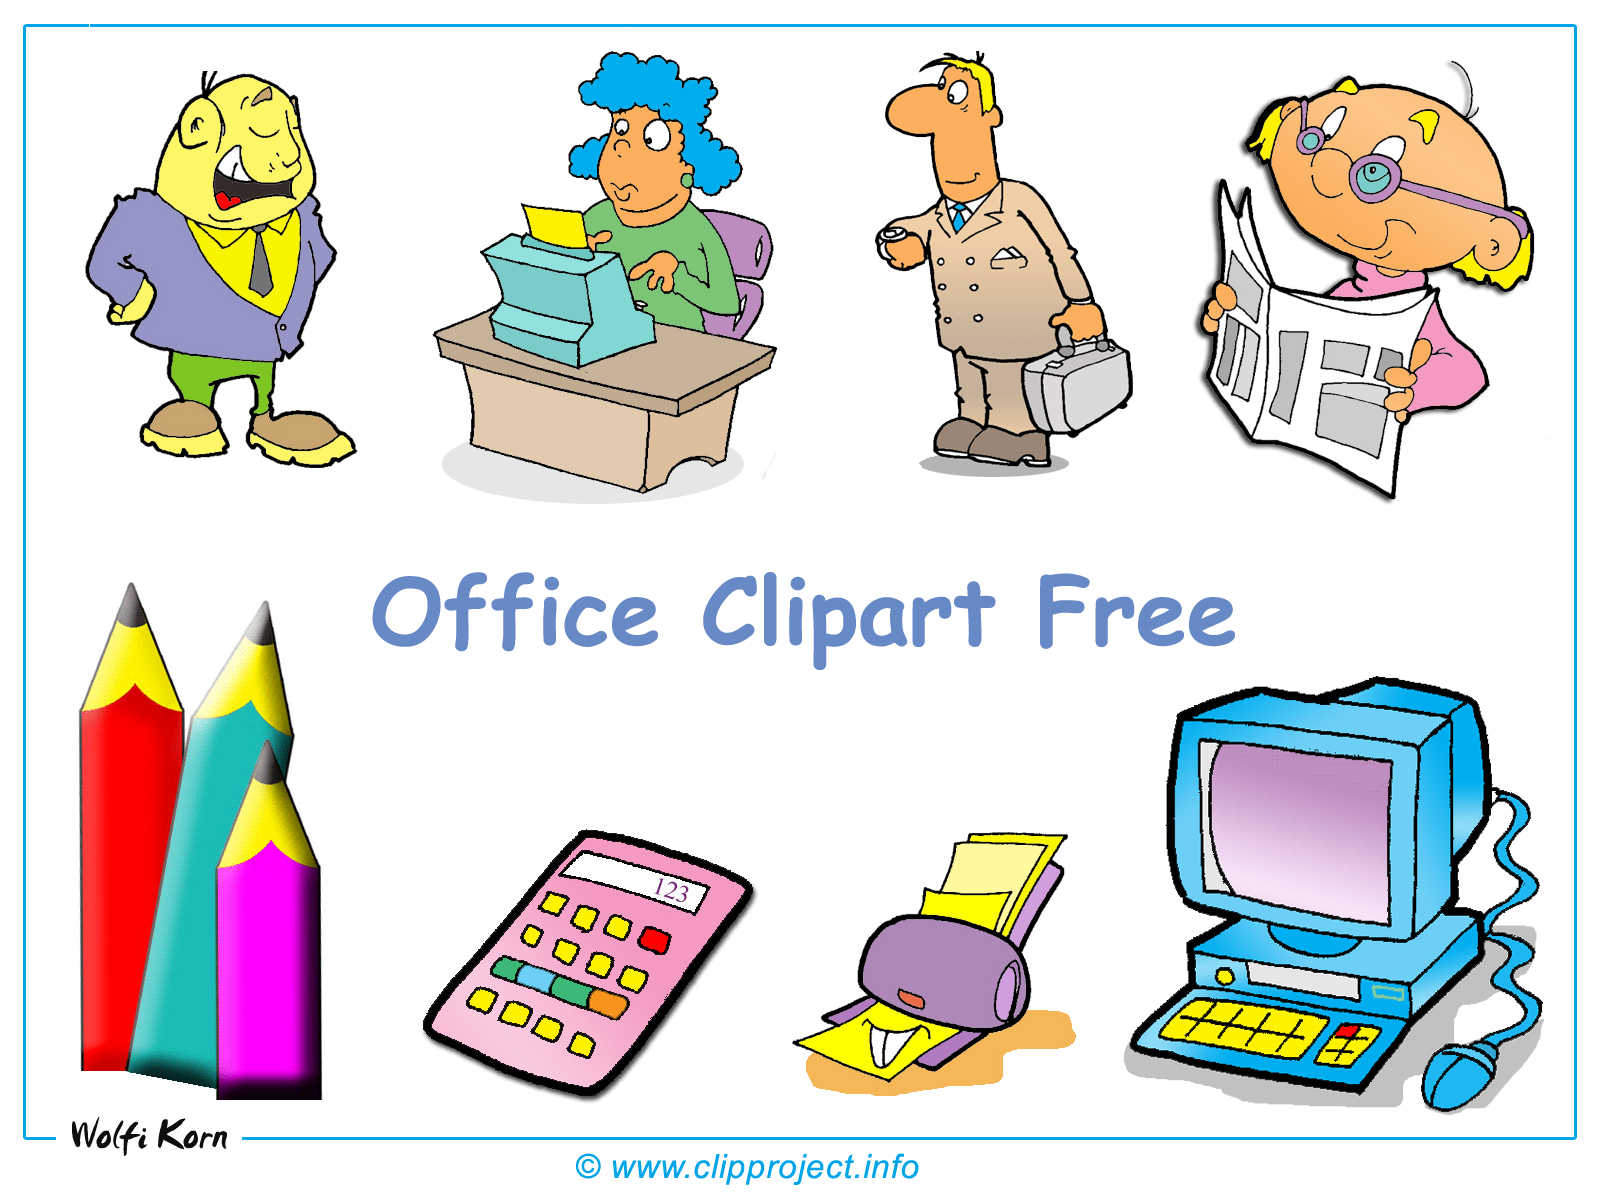 Free Office Clip Art and Grap